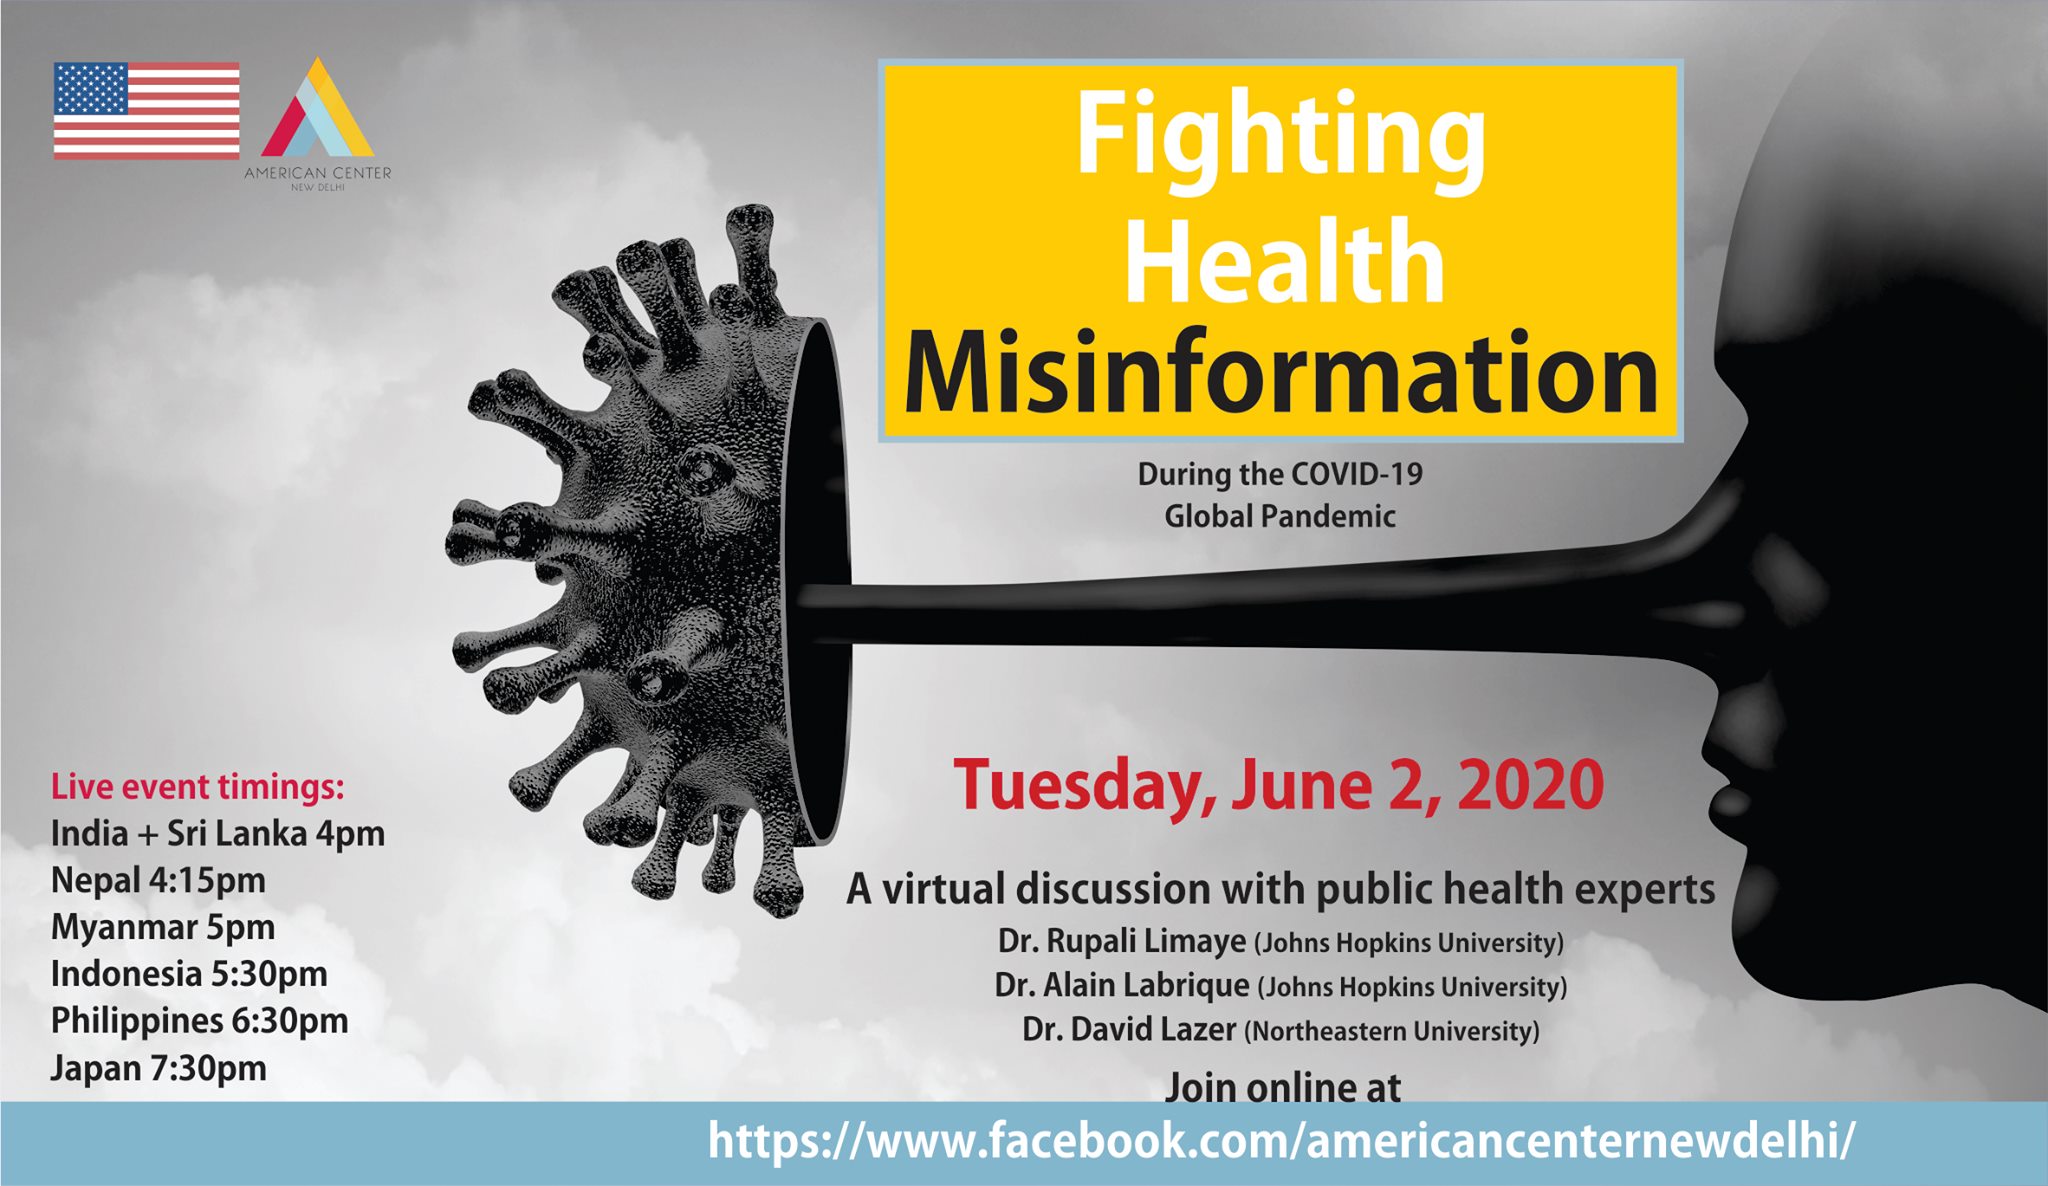 Fighting Health Misinformation During Covid-19 Global Pandemic